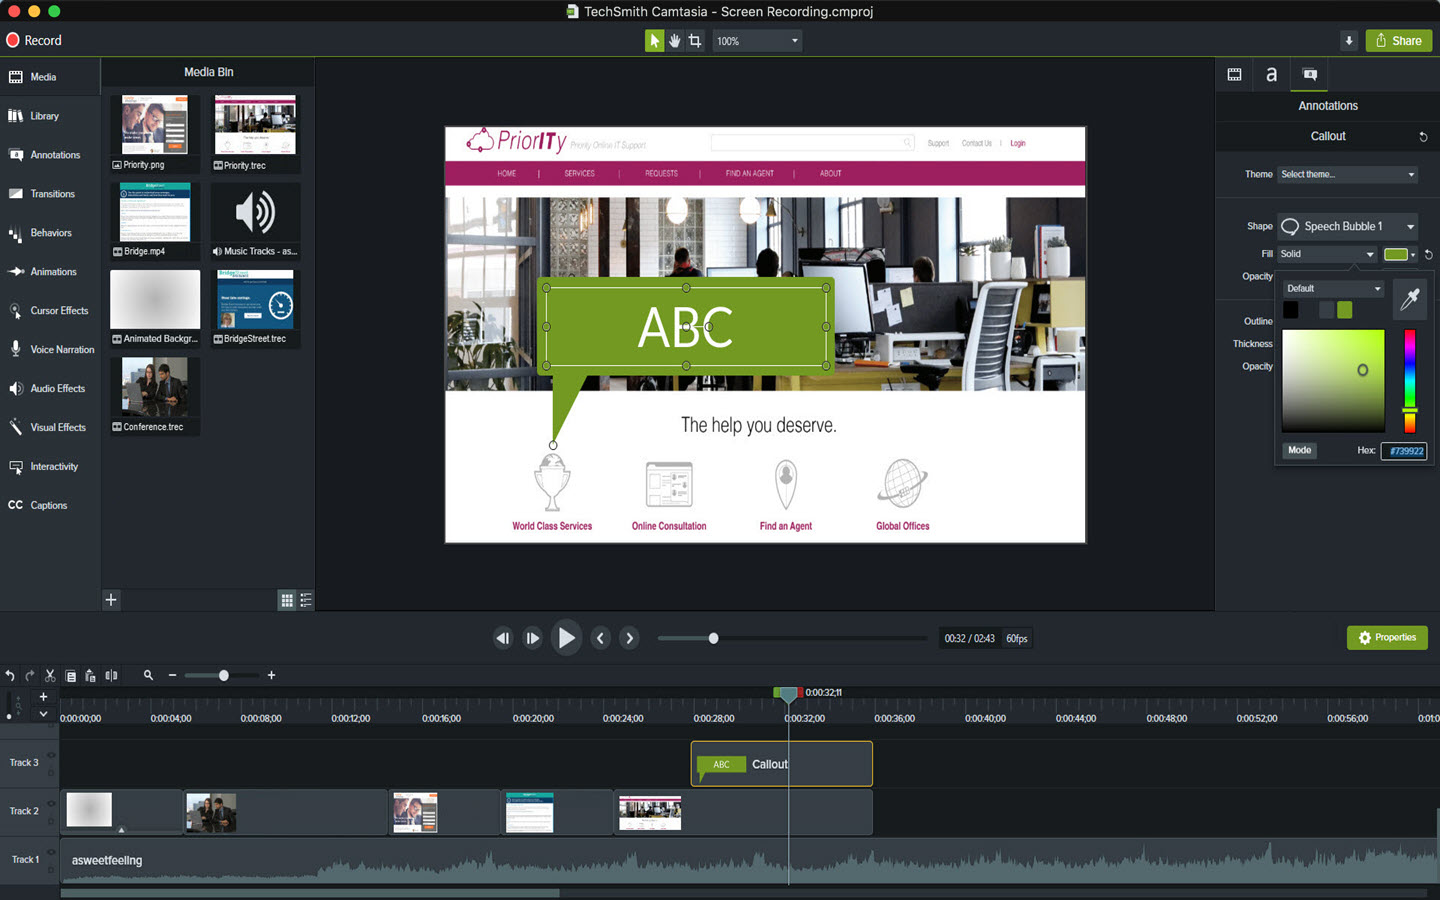 Camtasia callout selected on canvas and editing interface.